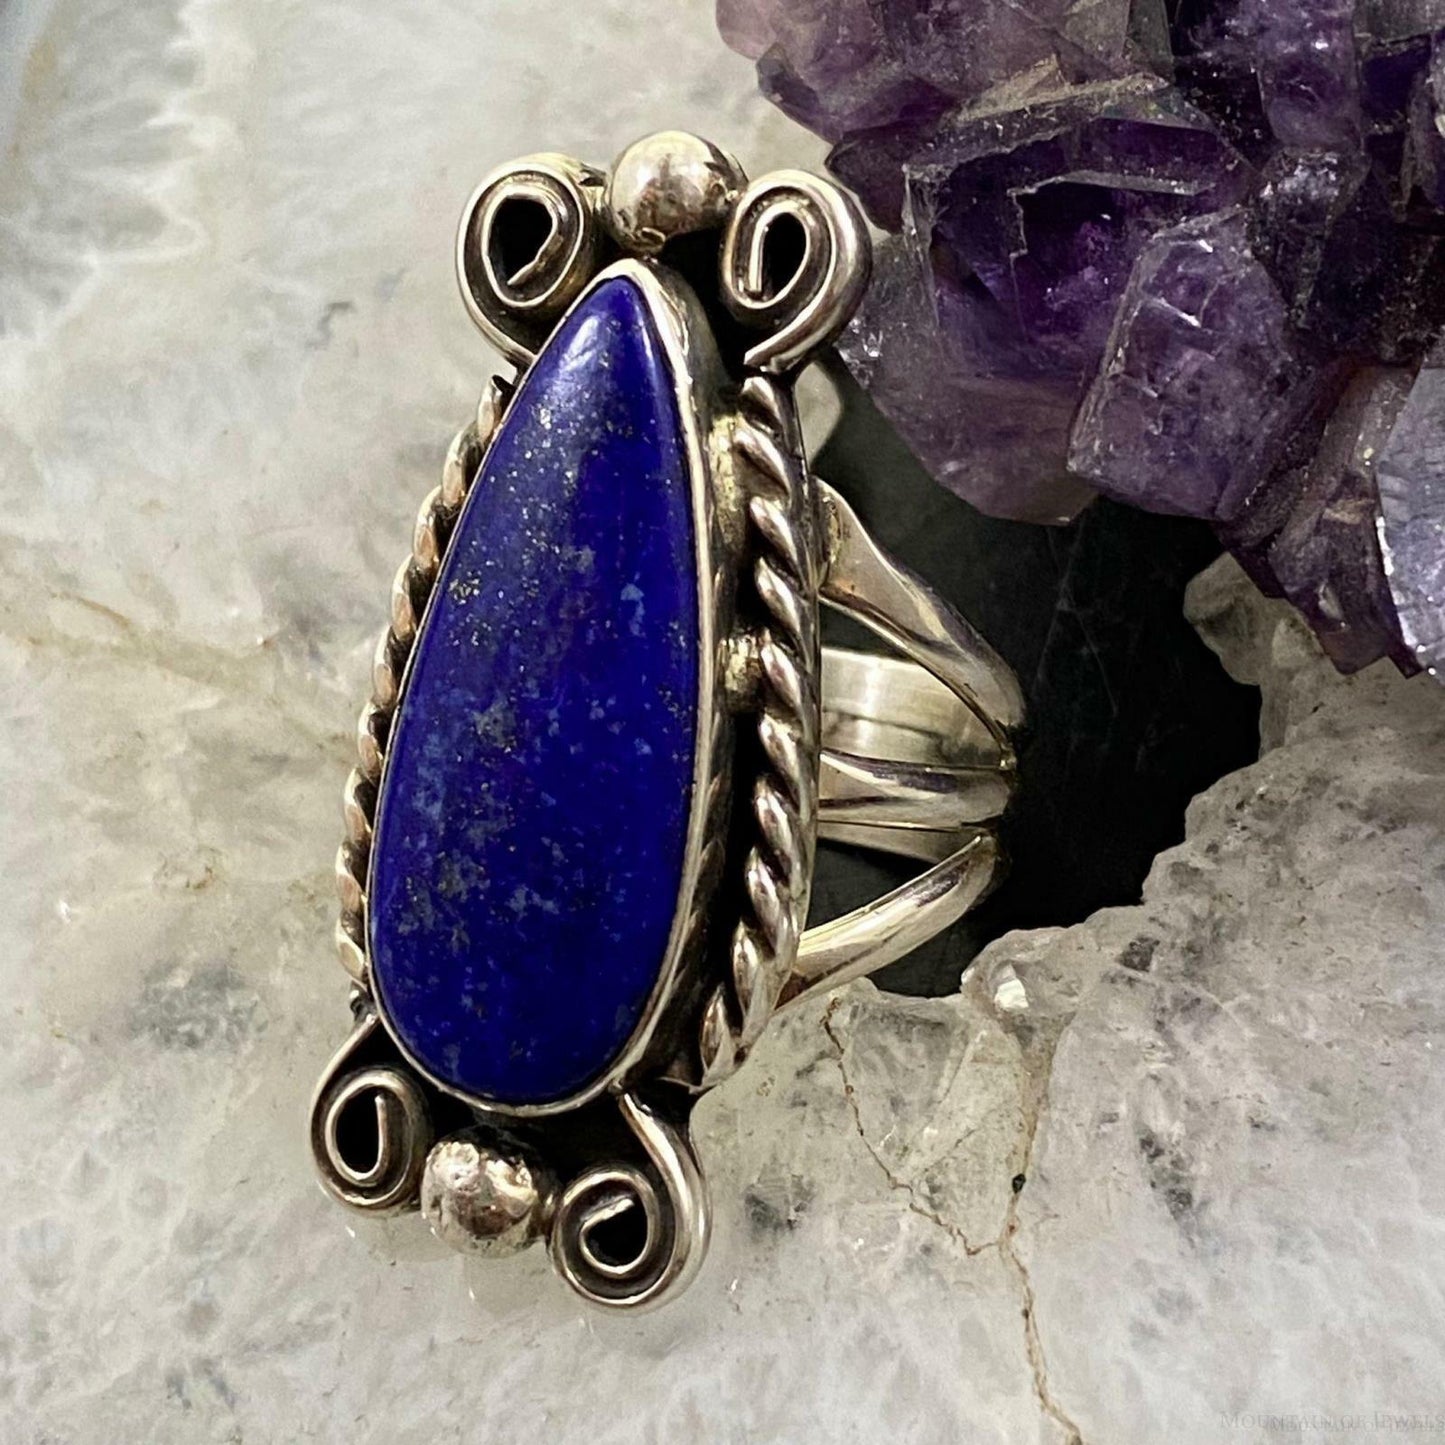 Native American Sterling Silver Lapis Decorated Teardrop Ring SZ 5.75 For Women